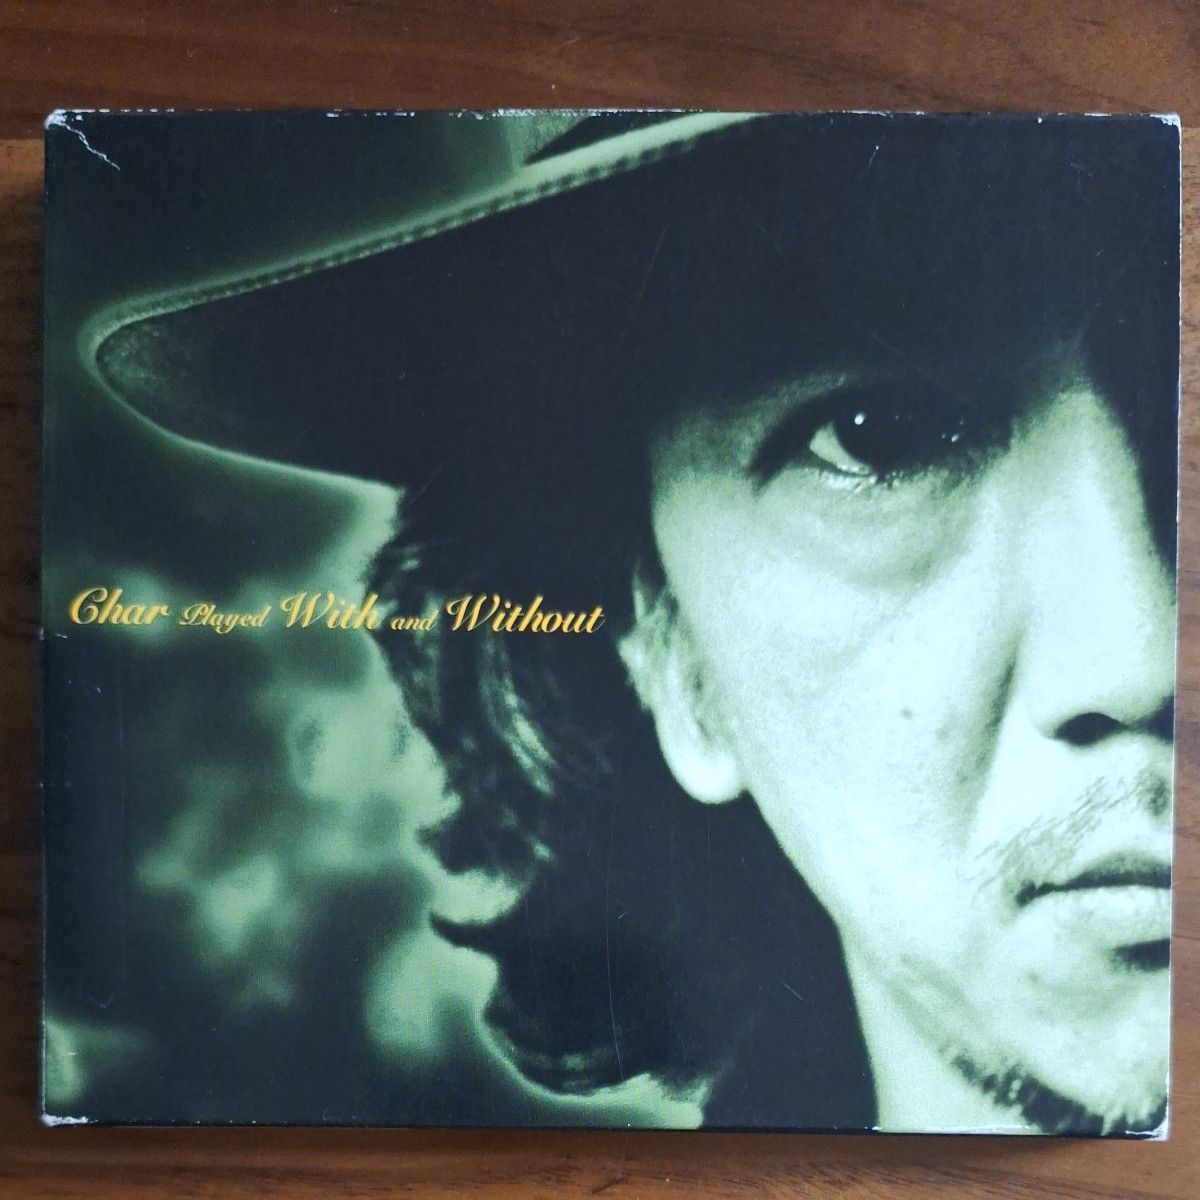 Char 2枚組CD『Char played With and Without』[帯付き]　POCH-1993/1994